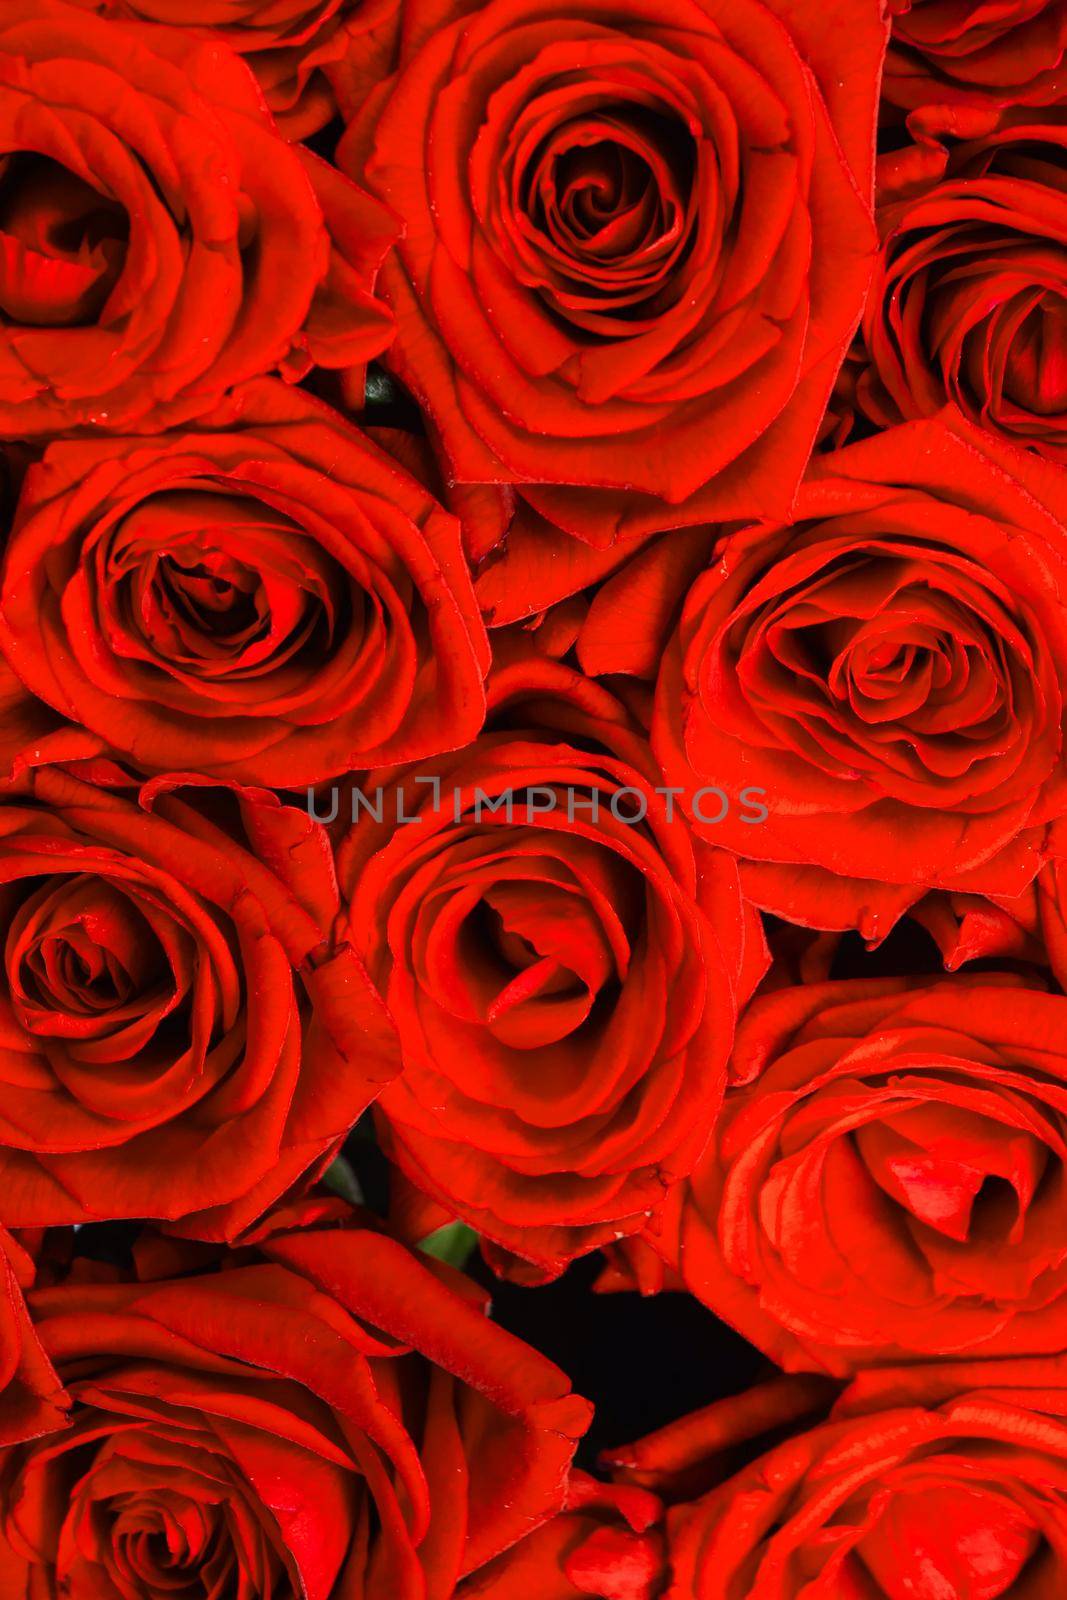 Red roses background by Yellowj